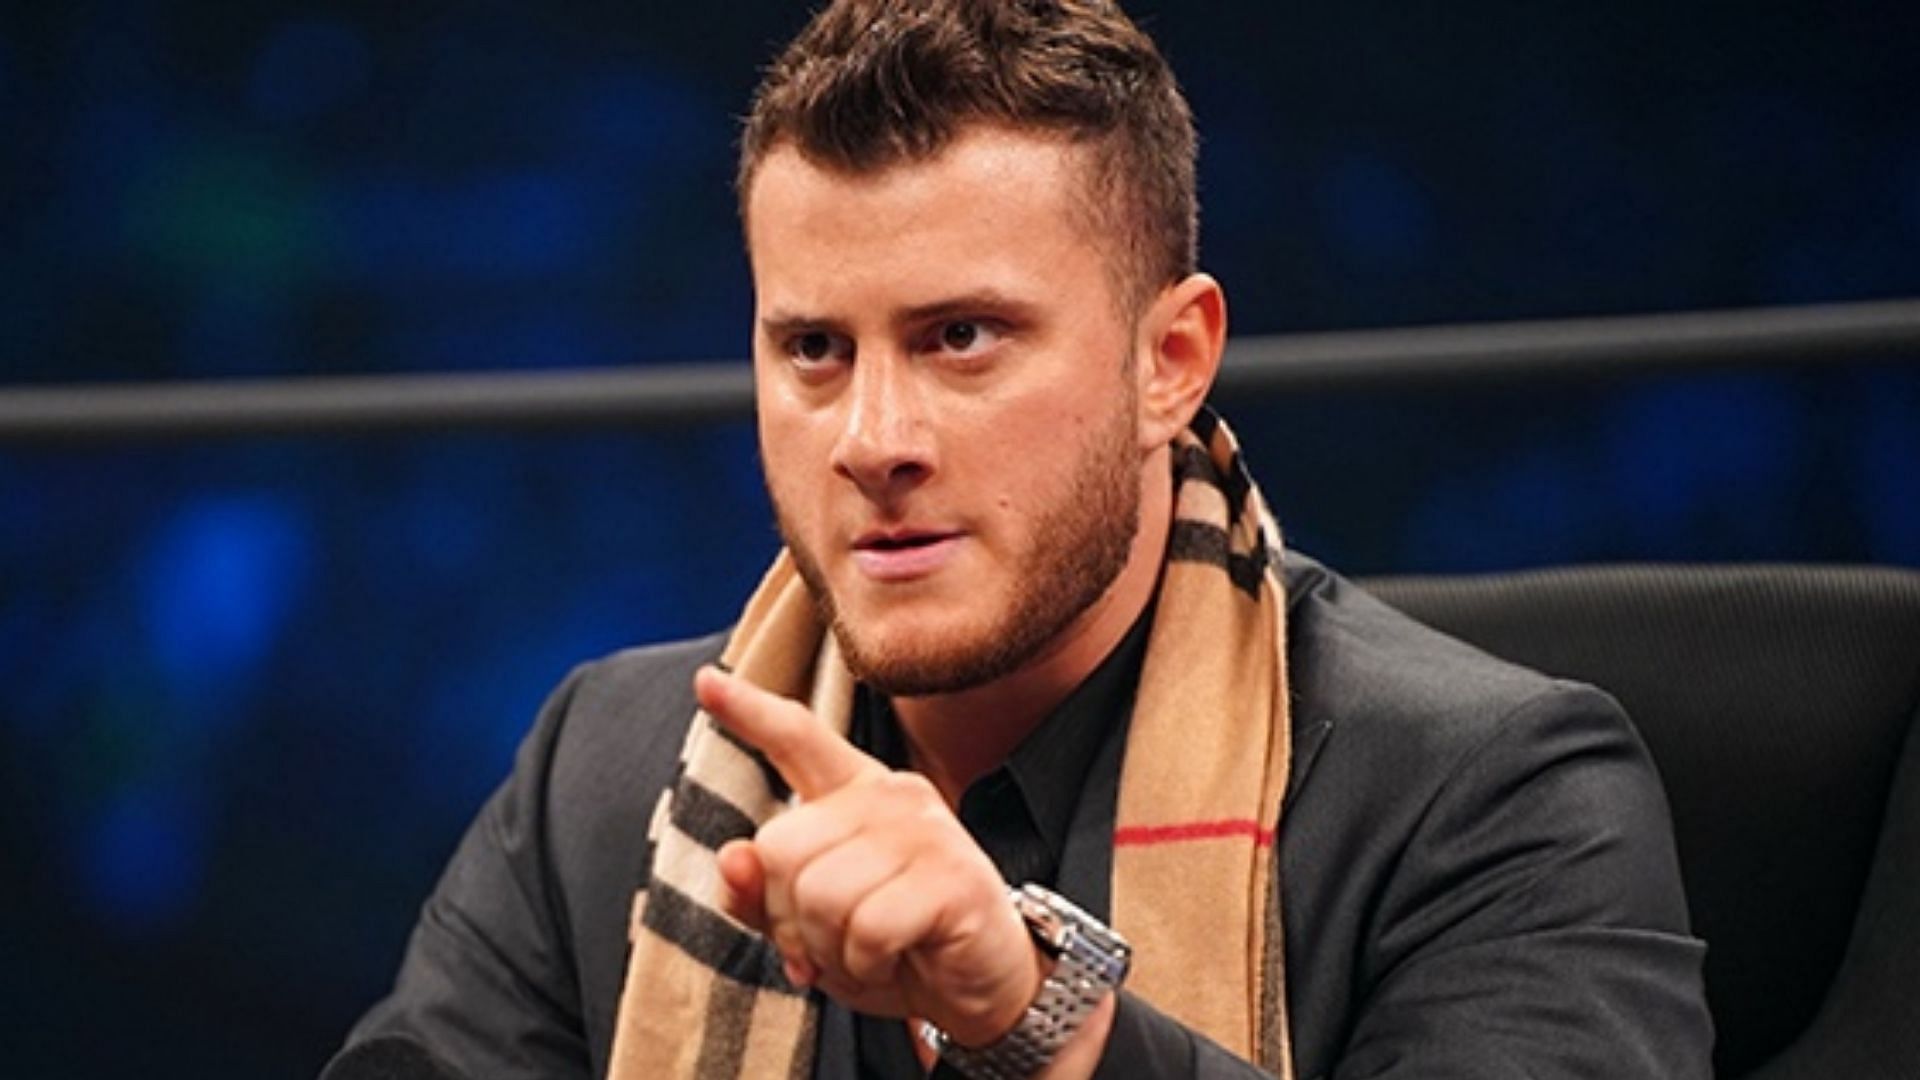 MJF is the current AEW World Champion.